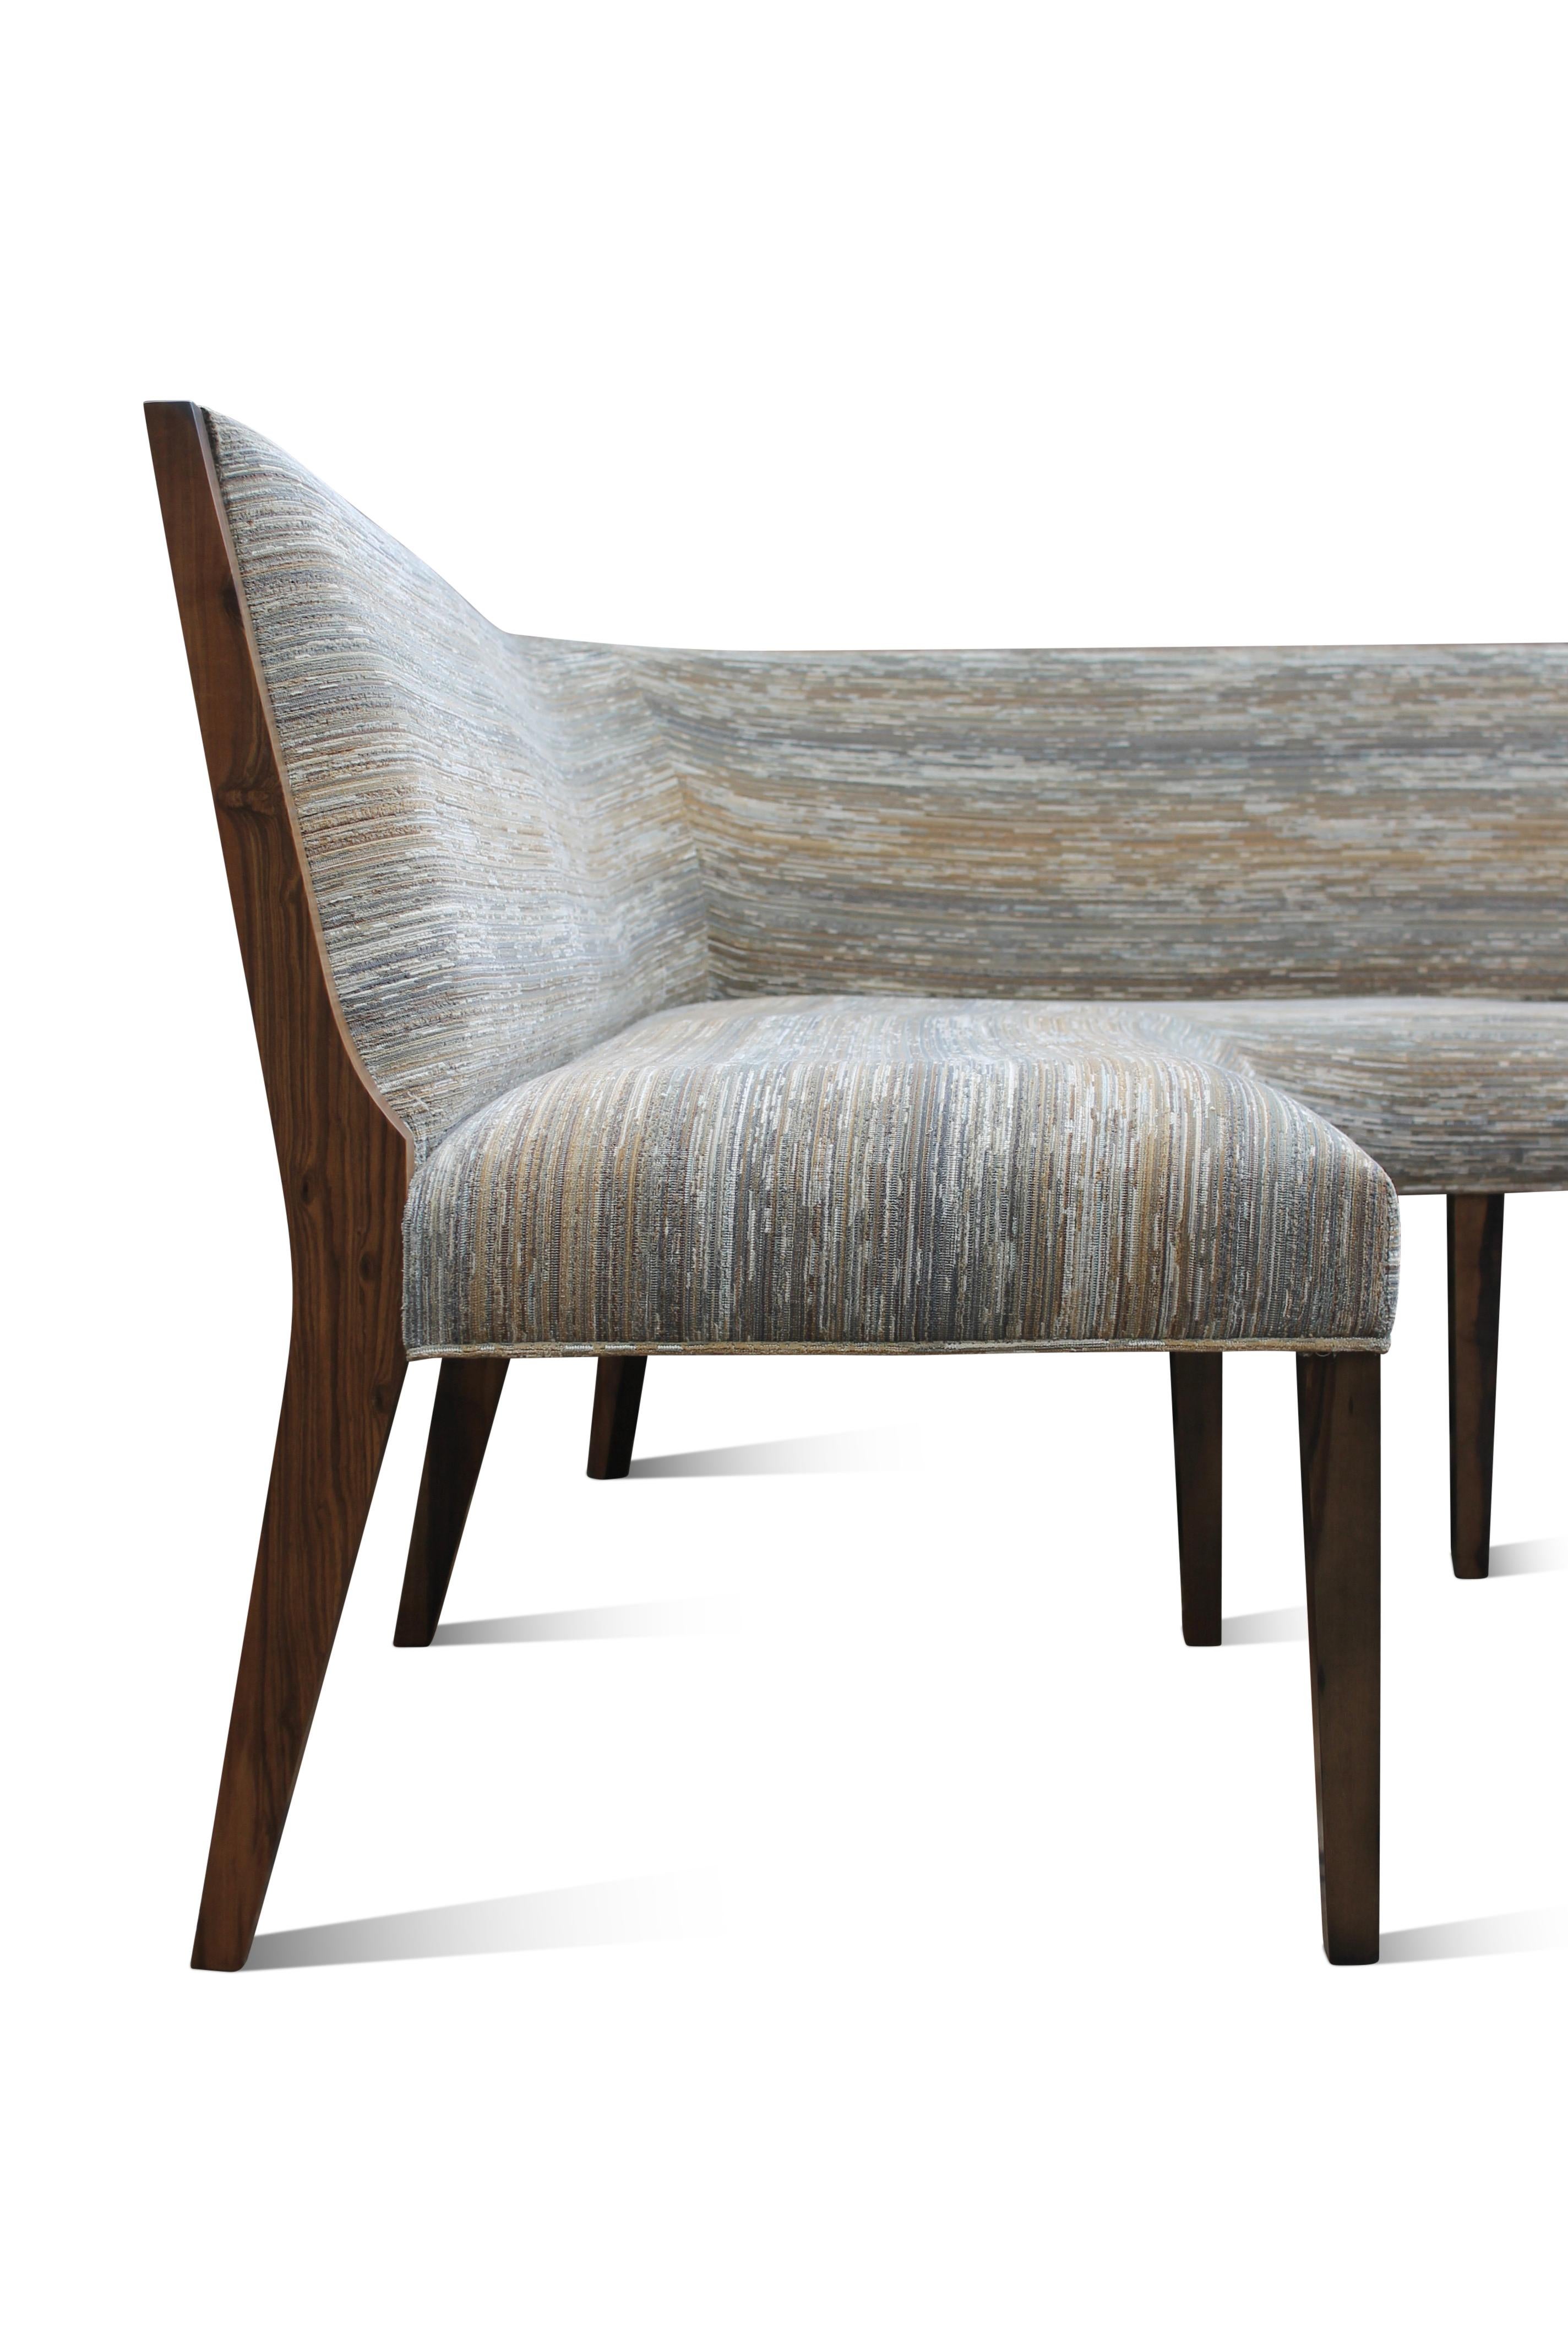 Costantini prides itself in using the hardest and most beautiful hardwoods in the construction of its line of seating. Any of its standard chairs can be made into a booth, by repeating the back leg and building the rest of the structure to your